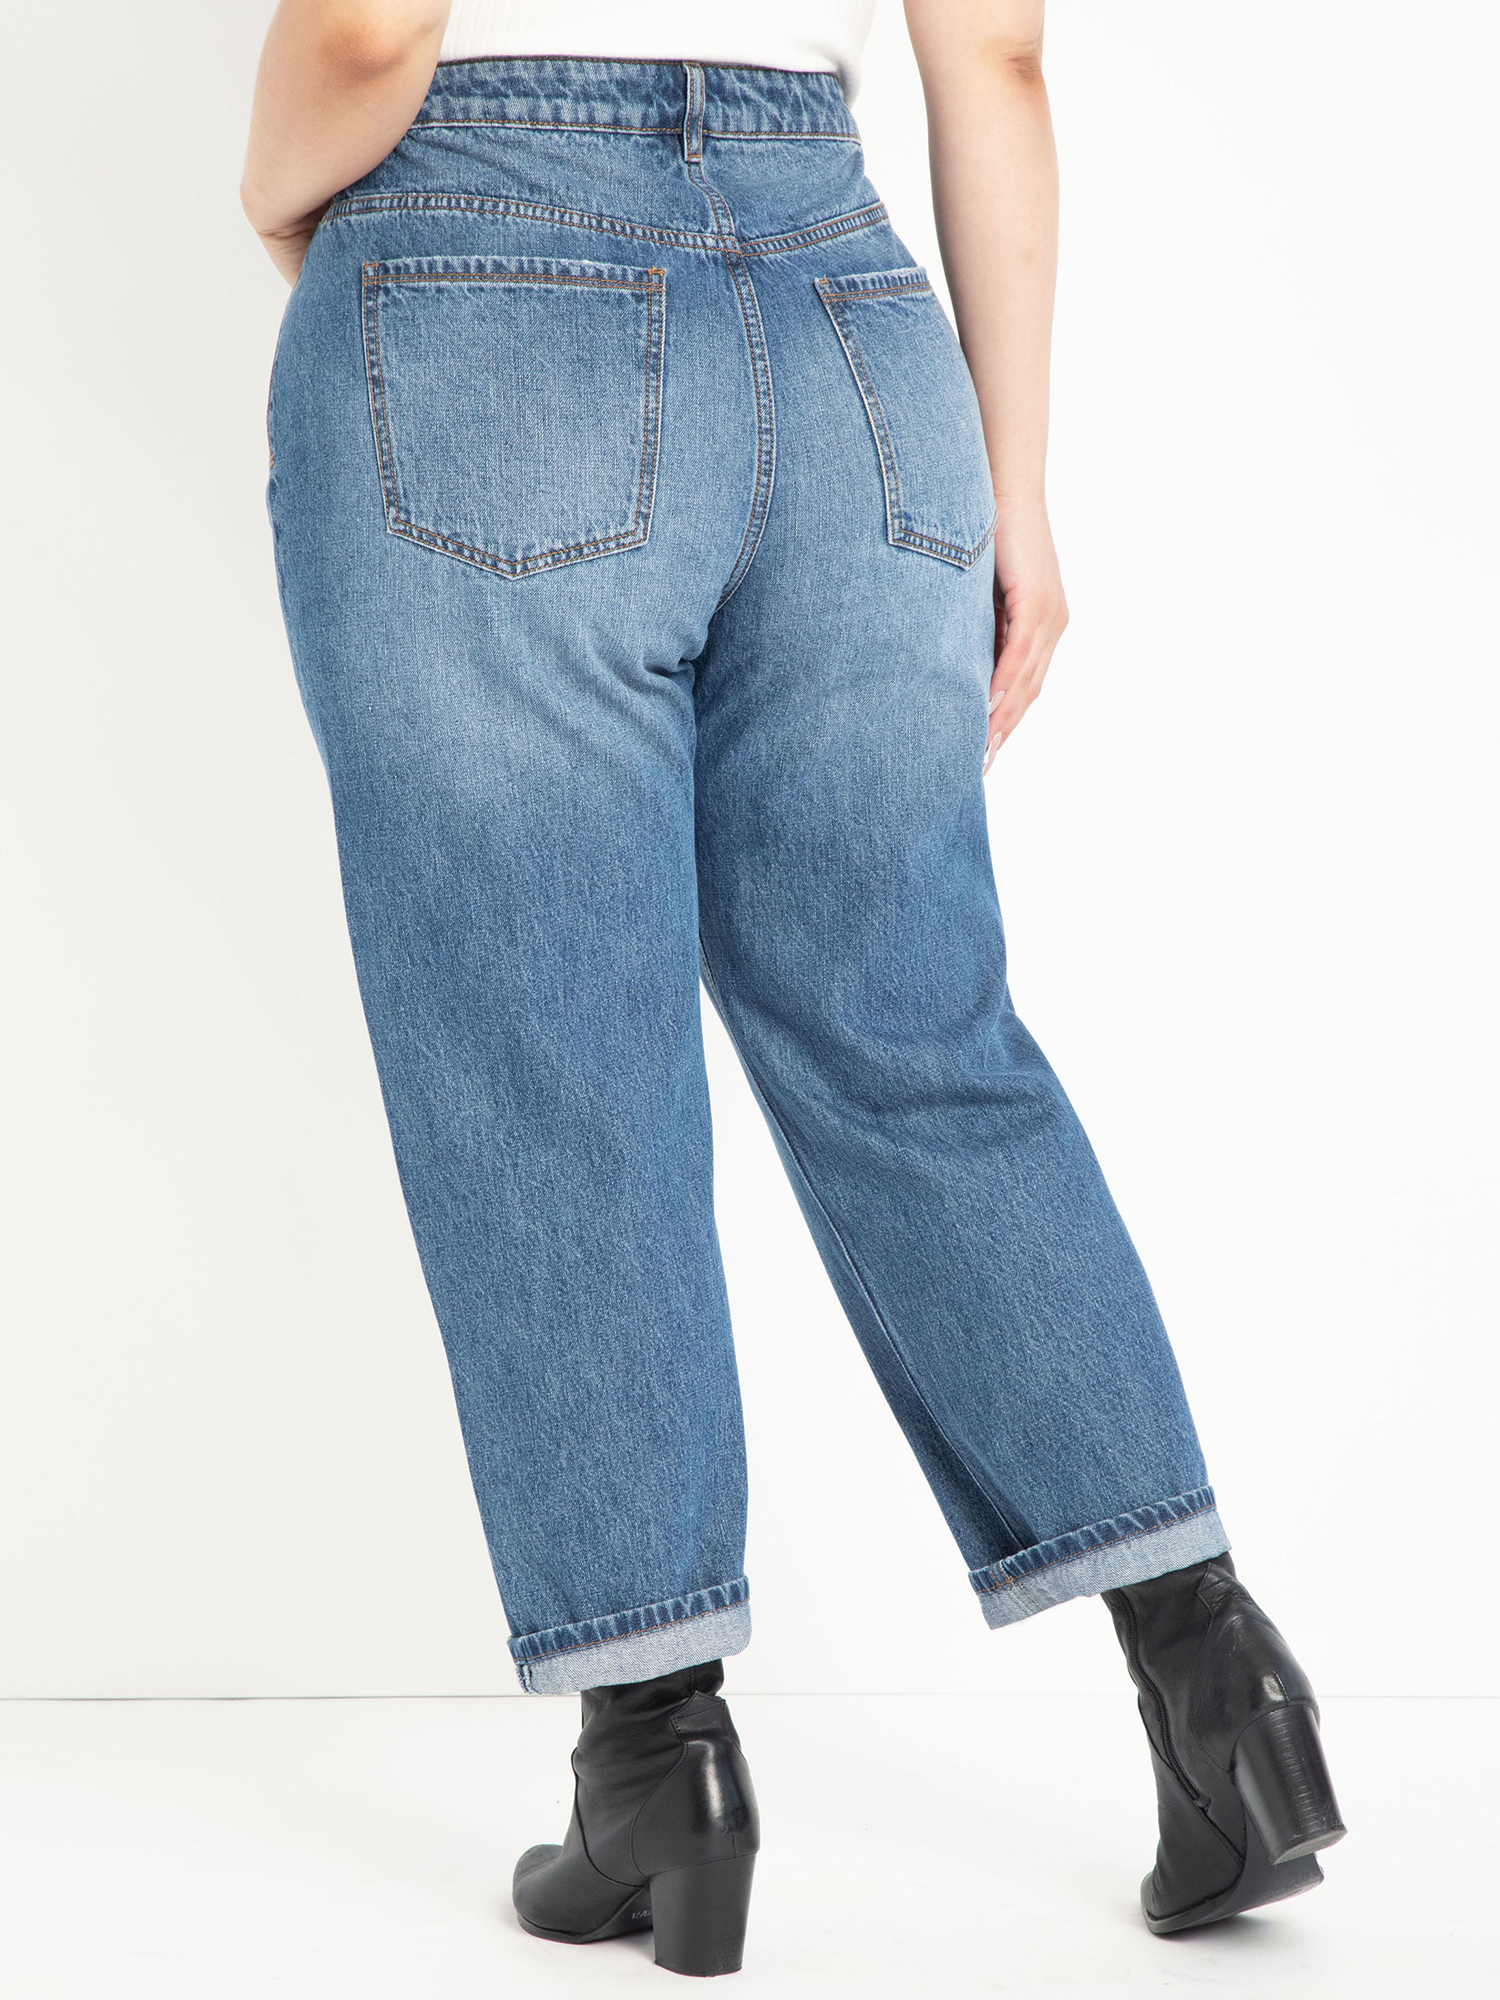 ELOQUII Elements Plus Size Distressed Mom Jeans - image 3 of 3